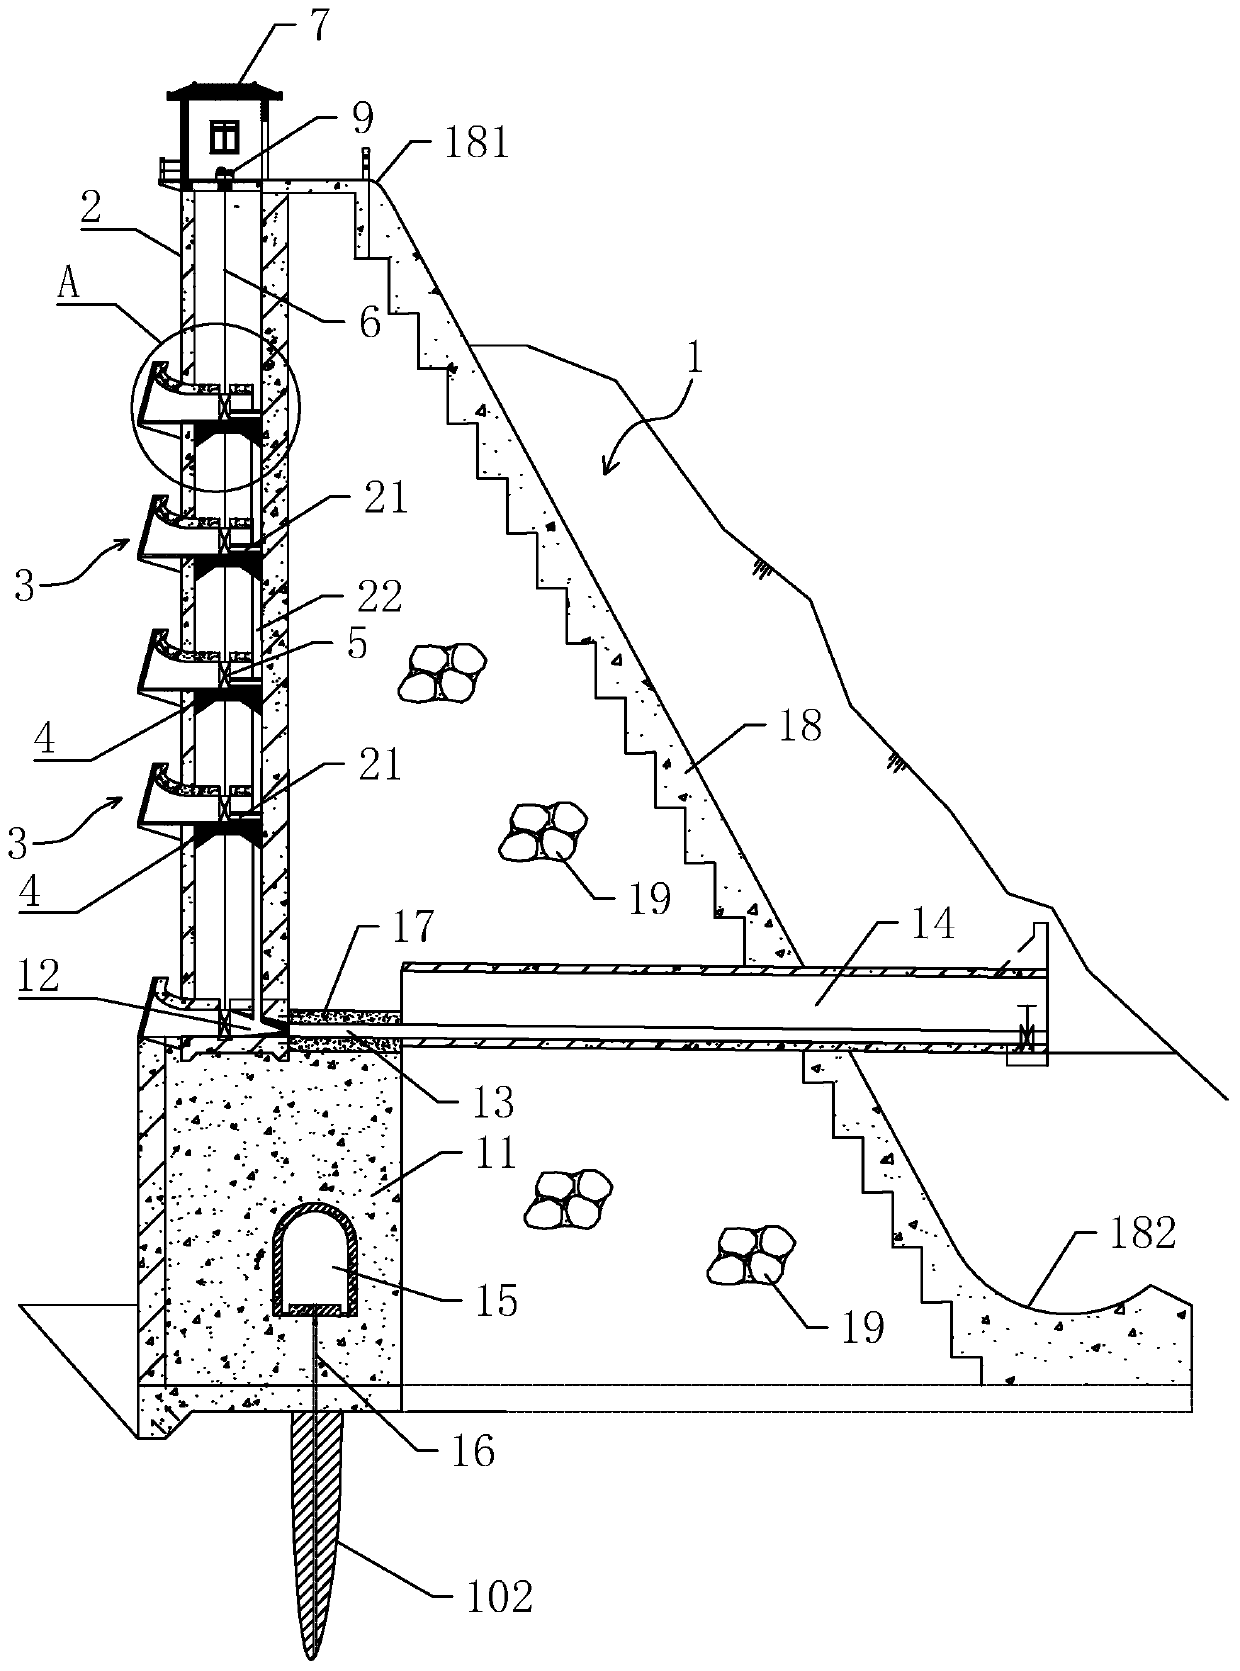 Layered water intake system for rockfill concrete gravity dam